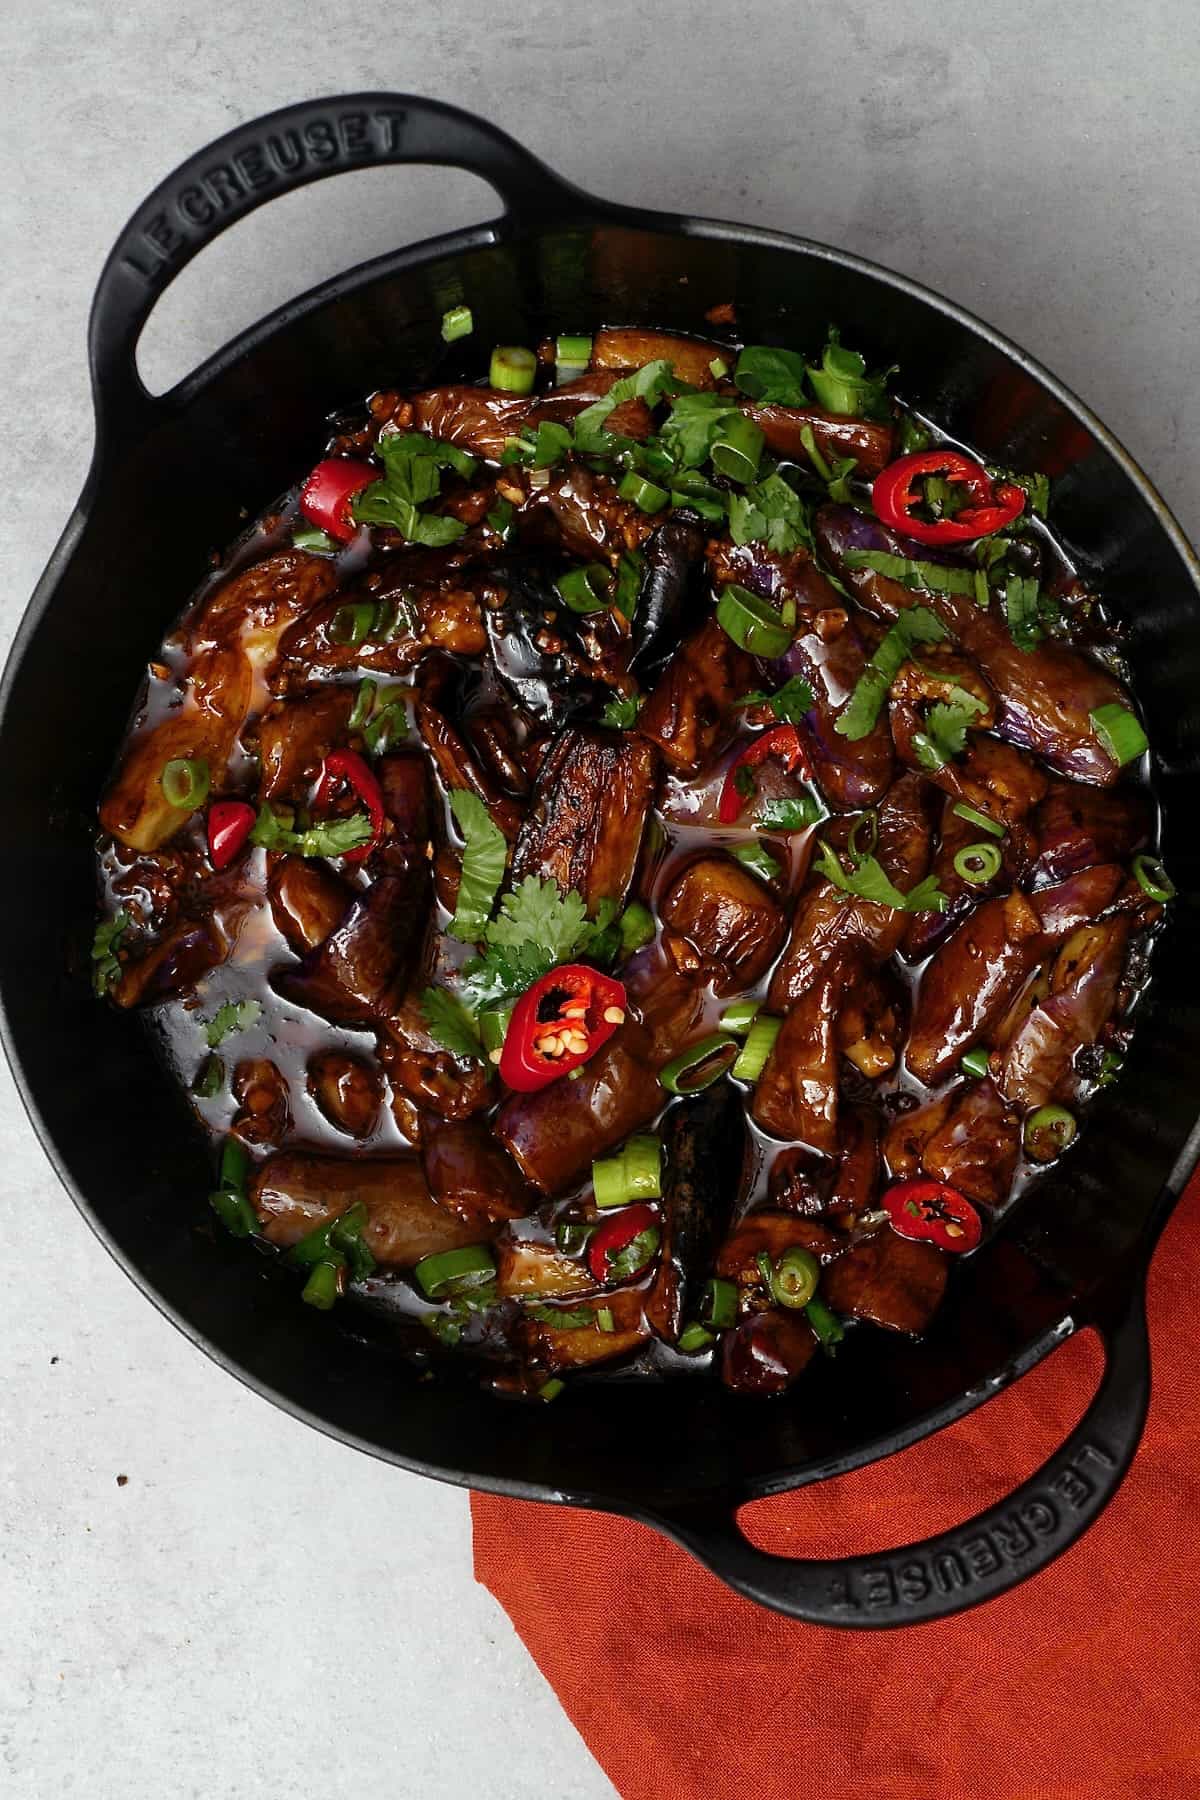 Chinese eggplant stir fry topped with red chili and cilantro